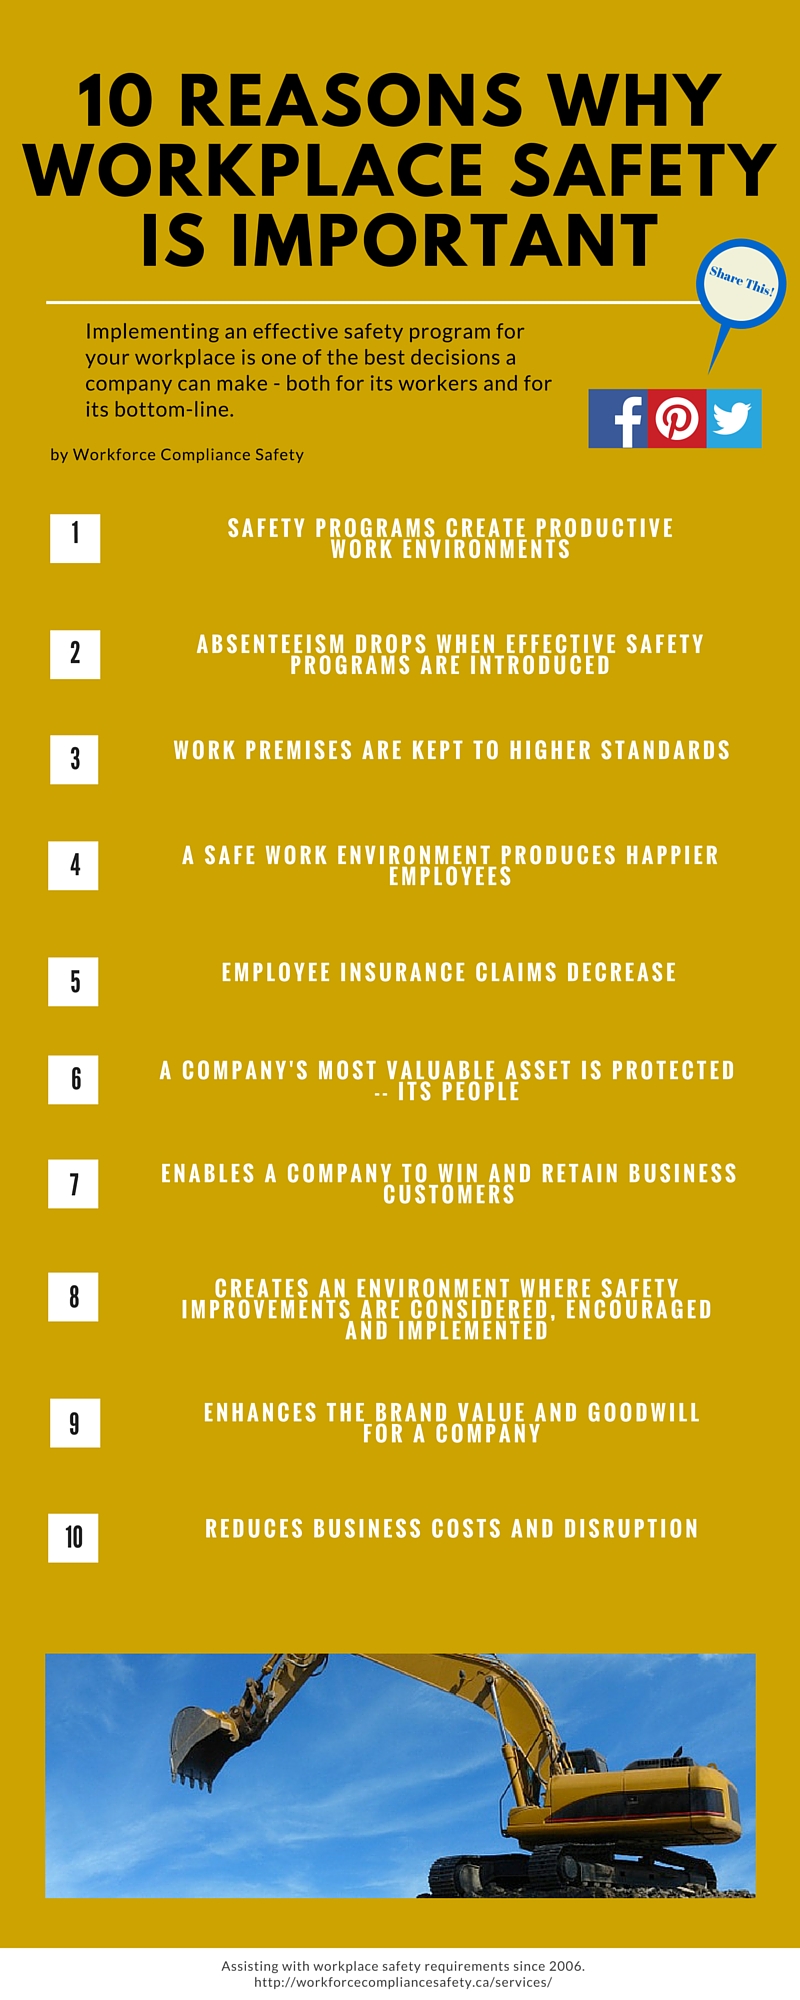 thought-shares-10-reasons-why-workplace-safety-is-important